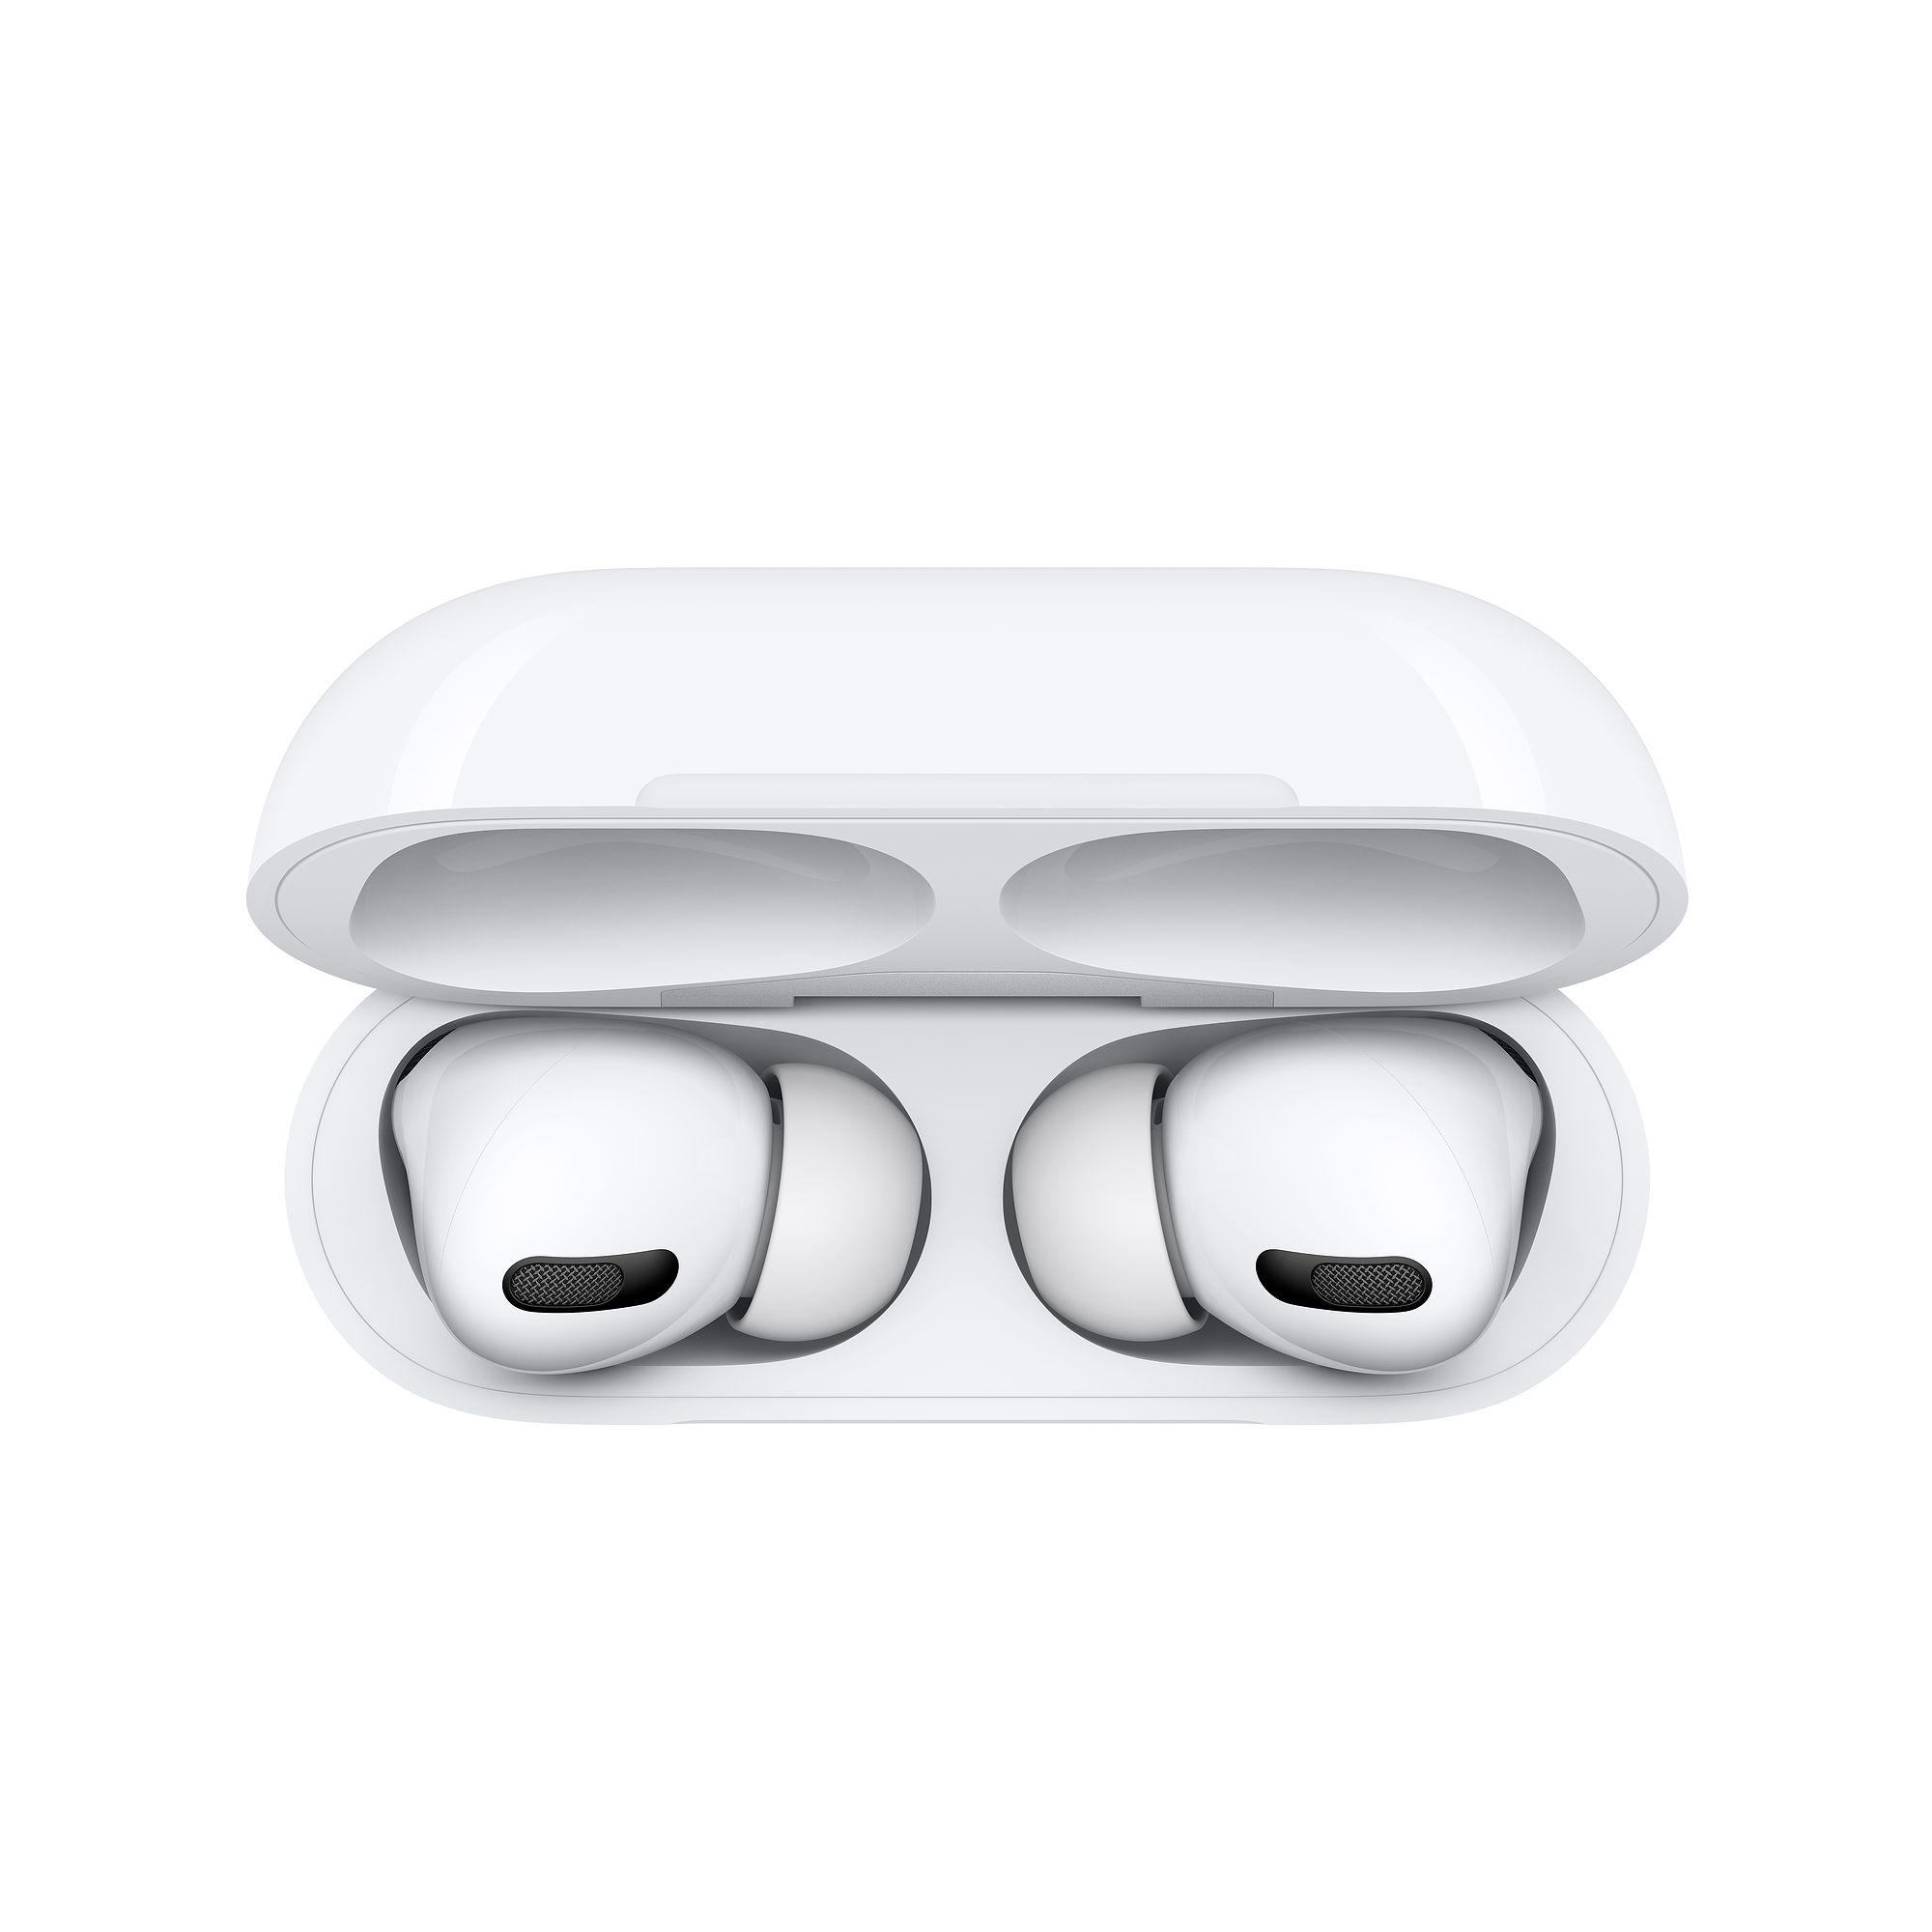 Tai Nghe Apple AirPods Pro Cũ